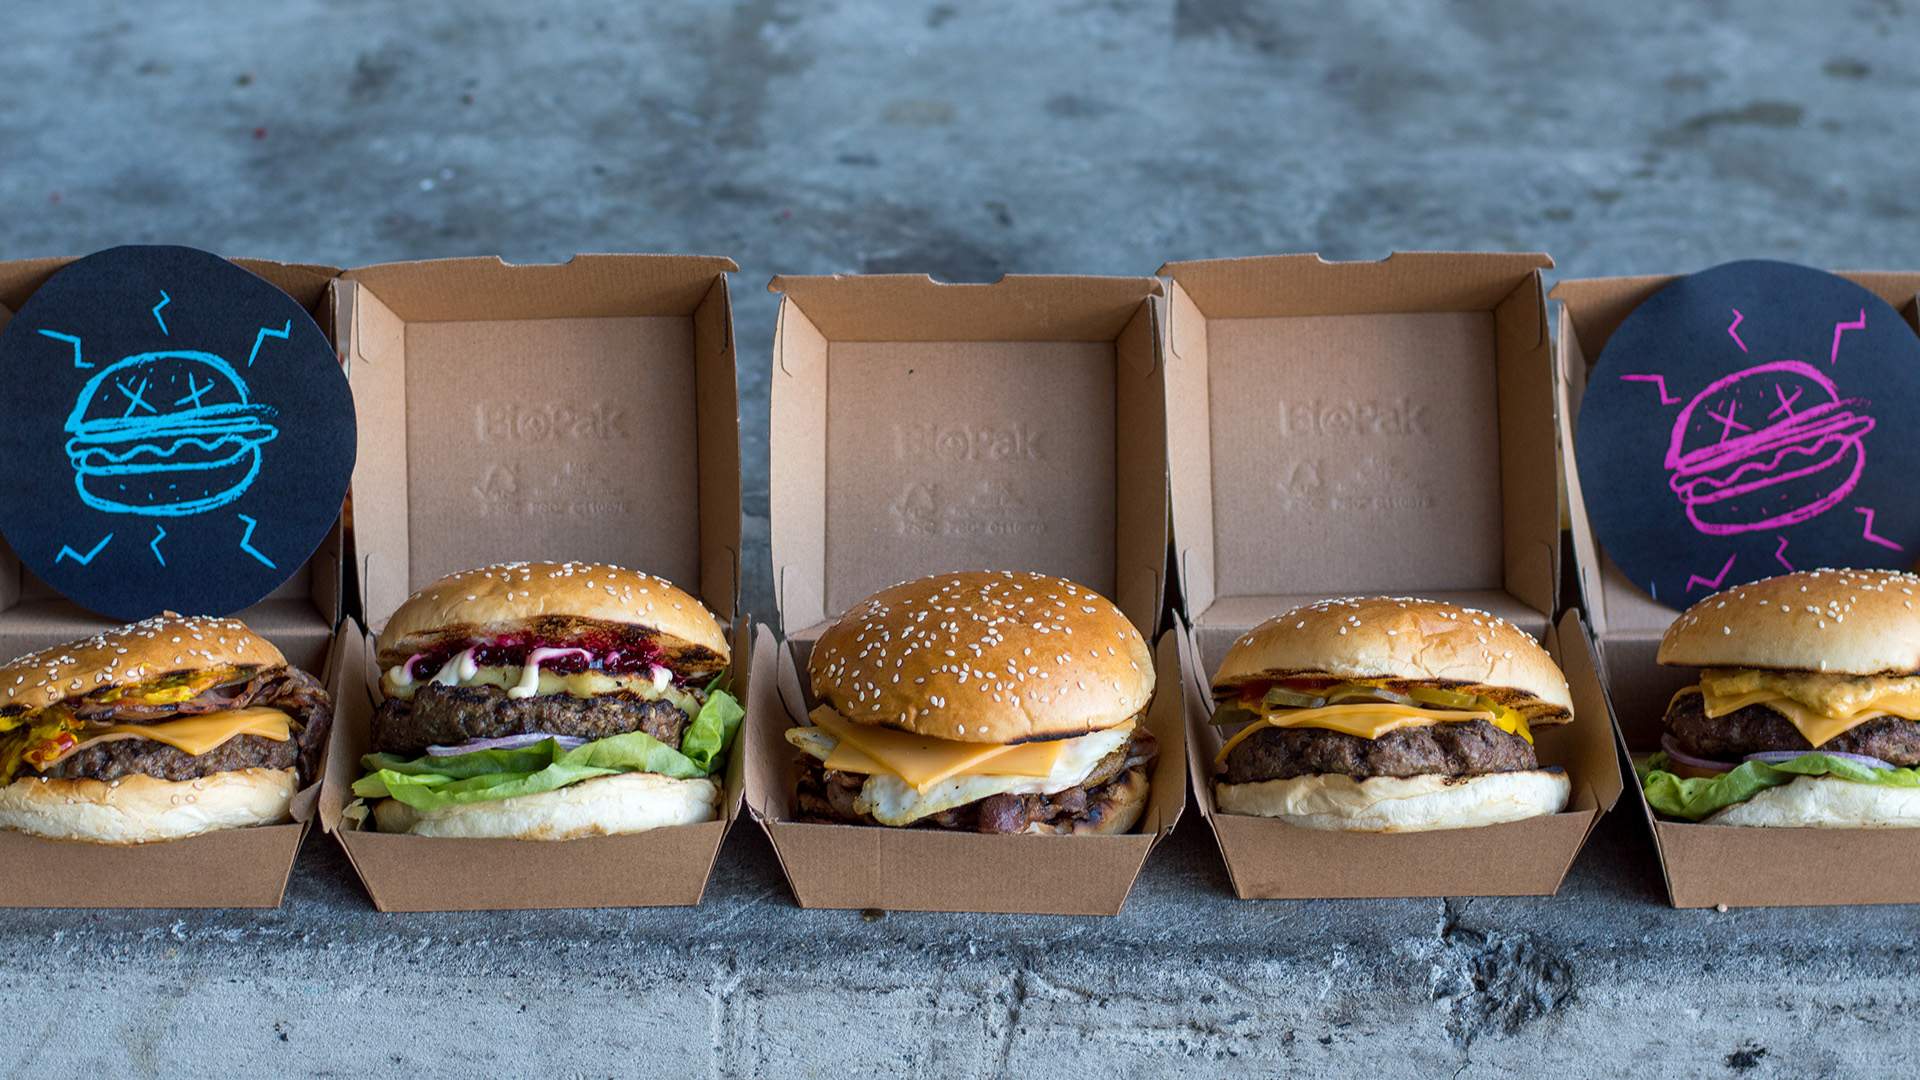 Brisbane's New Delivery-Only Burger Joint Launches with $2 Cheeseburgers